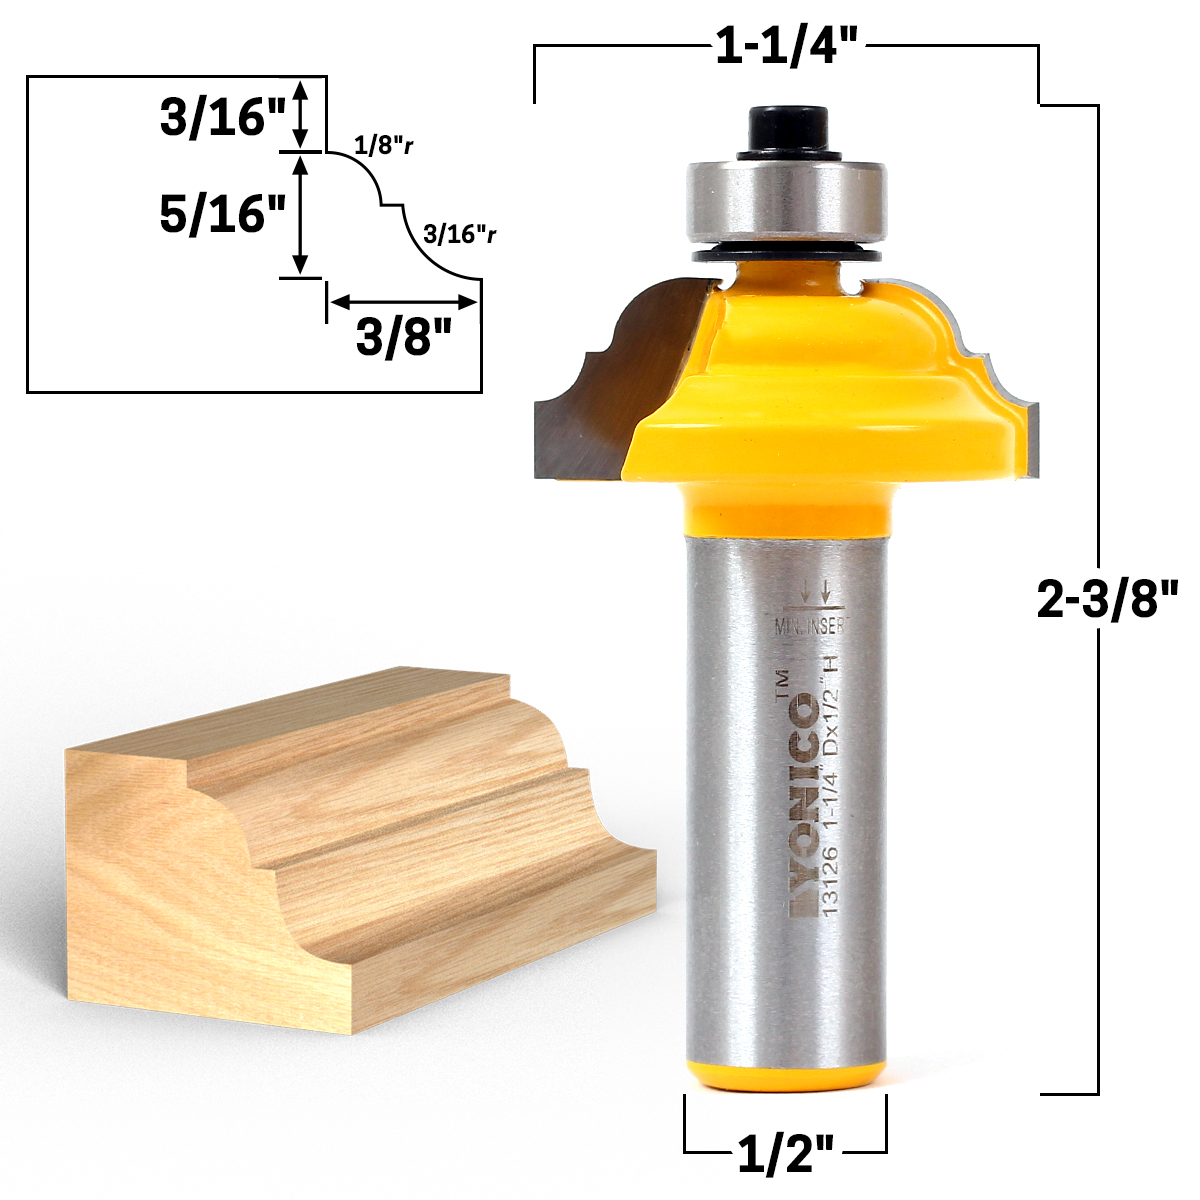 NEW  Yonico 1/8" R Double Roman Ogee Edge Profile Carbide Tip Router Bit y2 1 